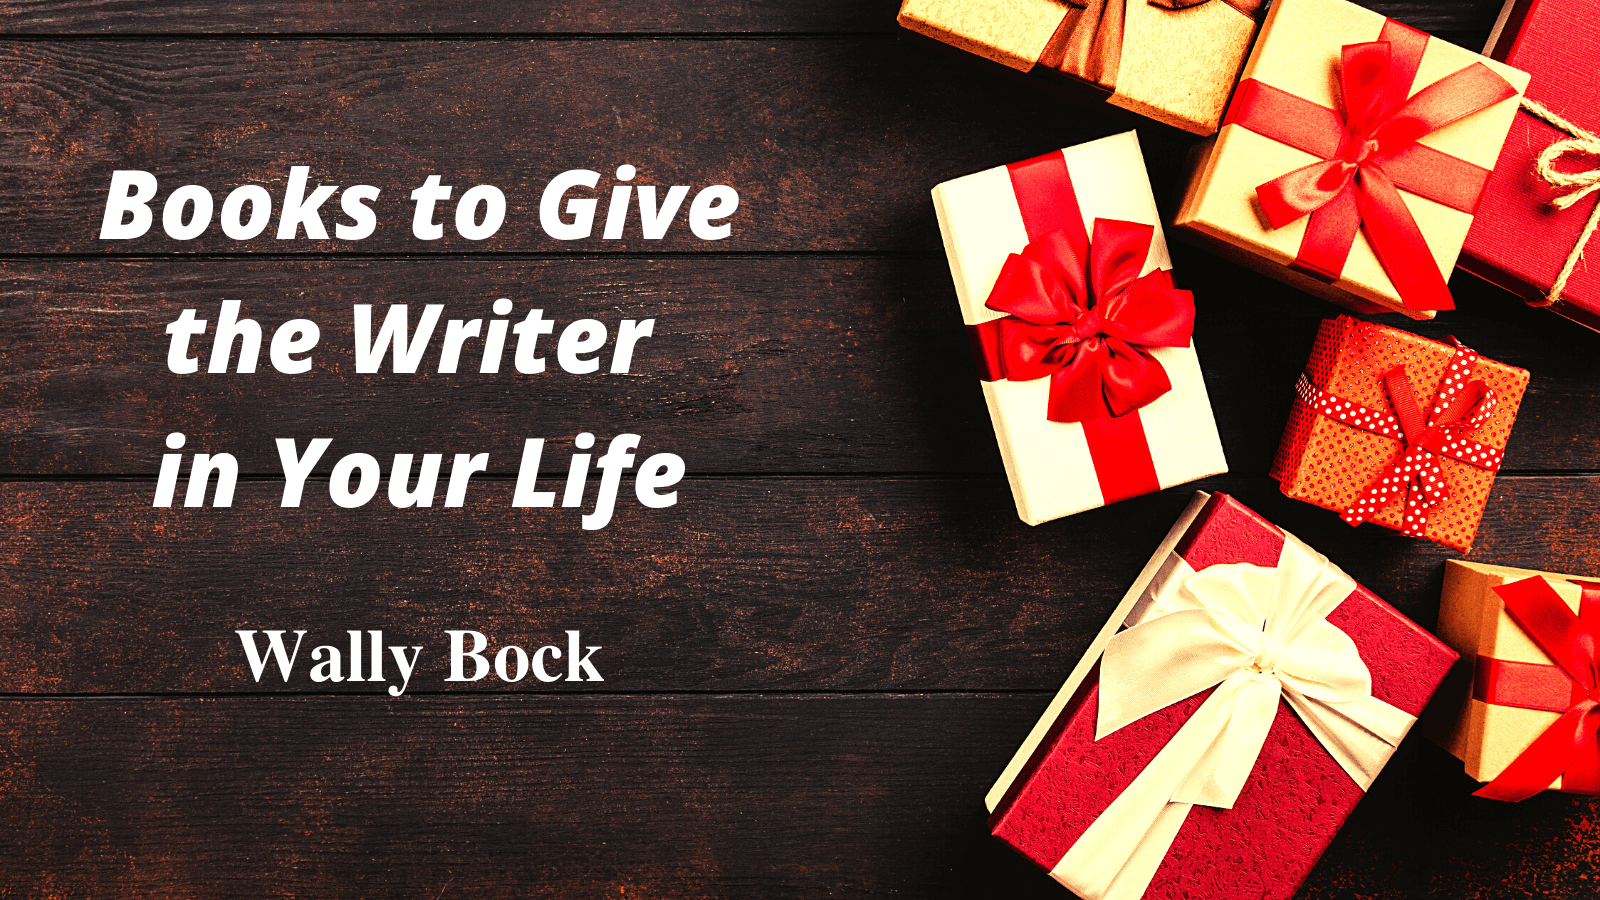 Books to Give the Writer in Your Life